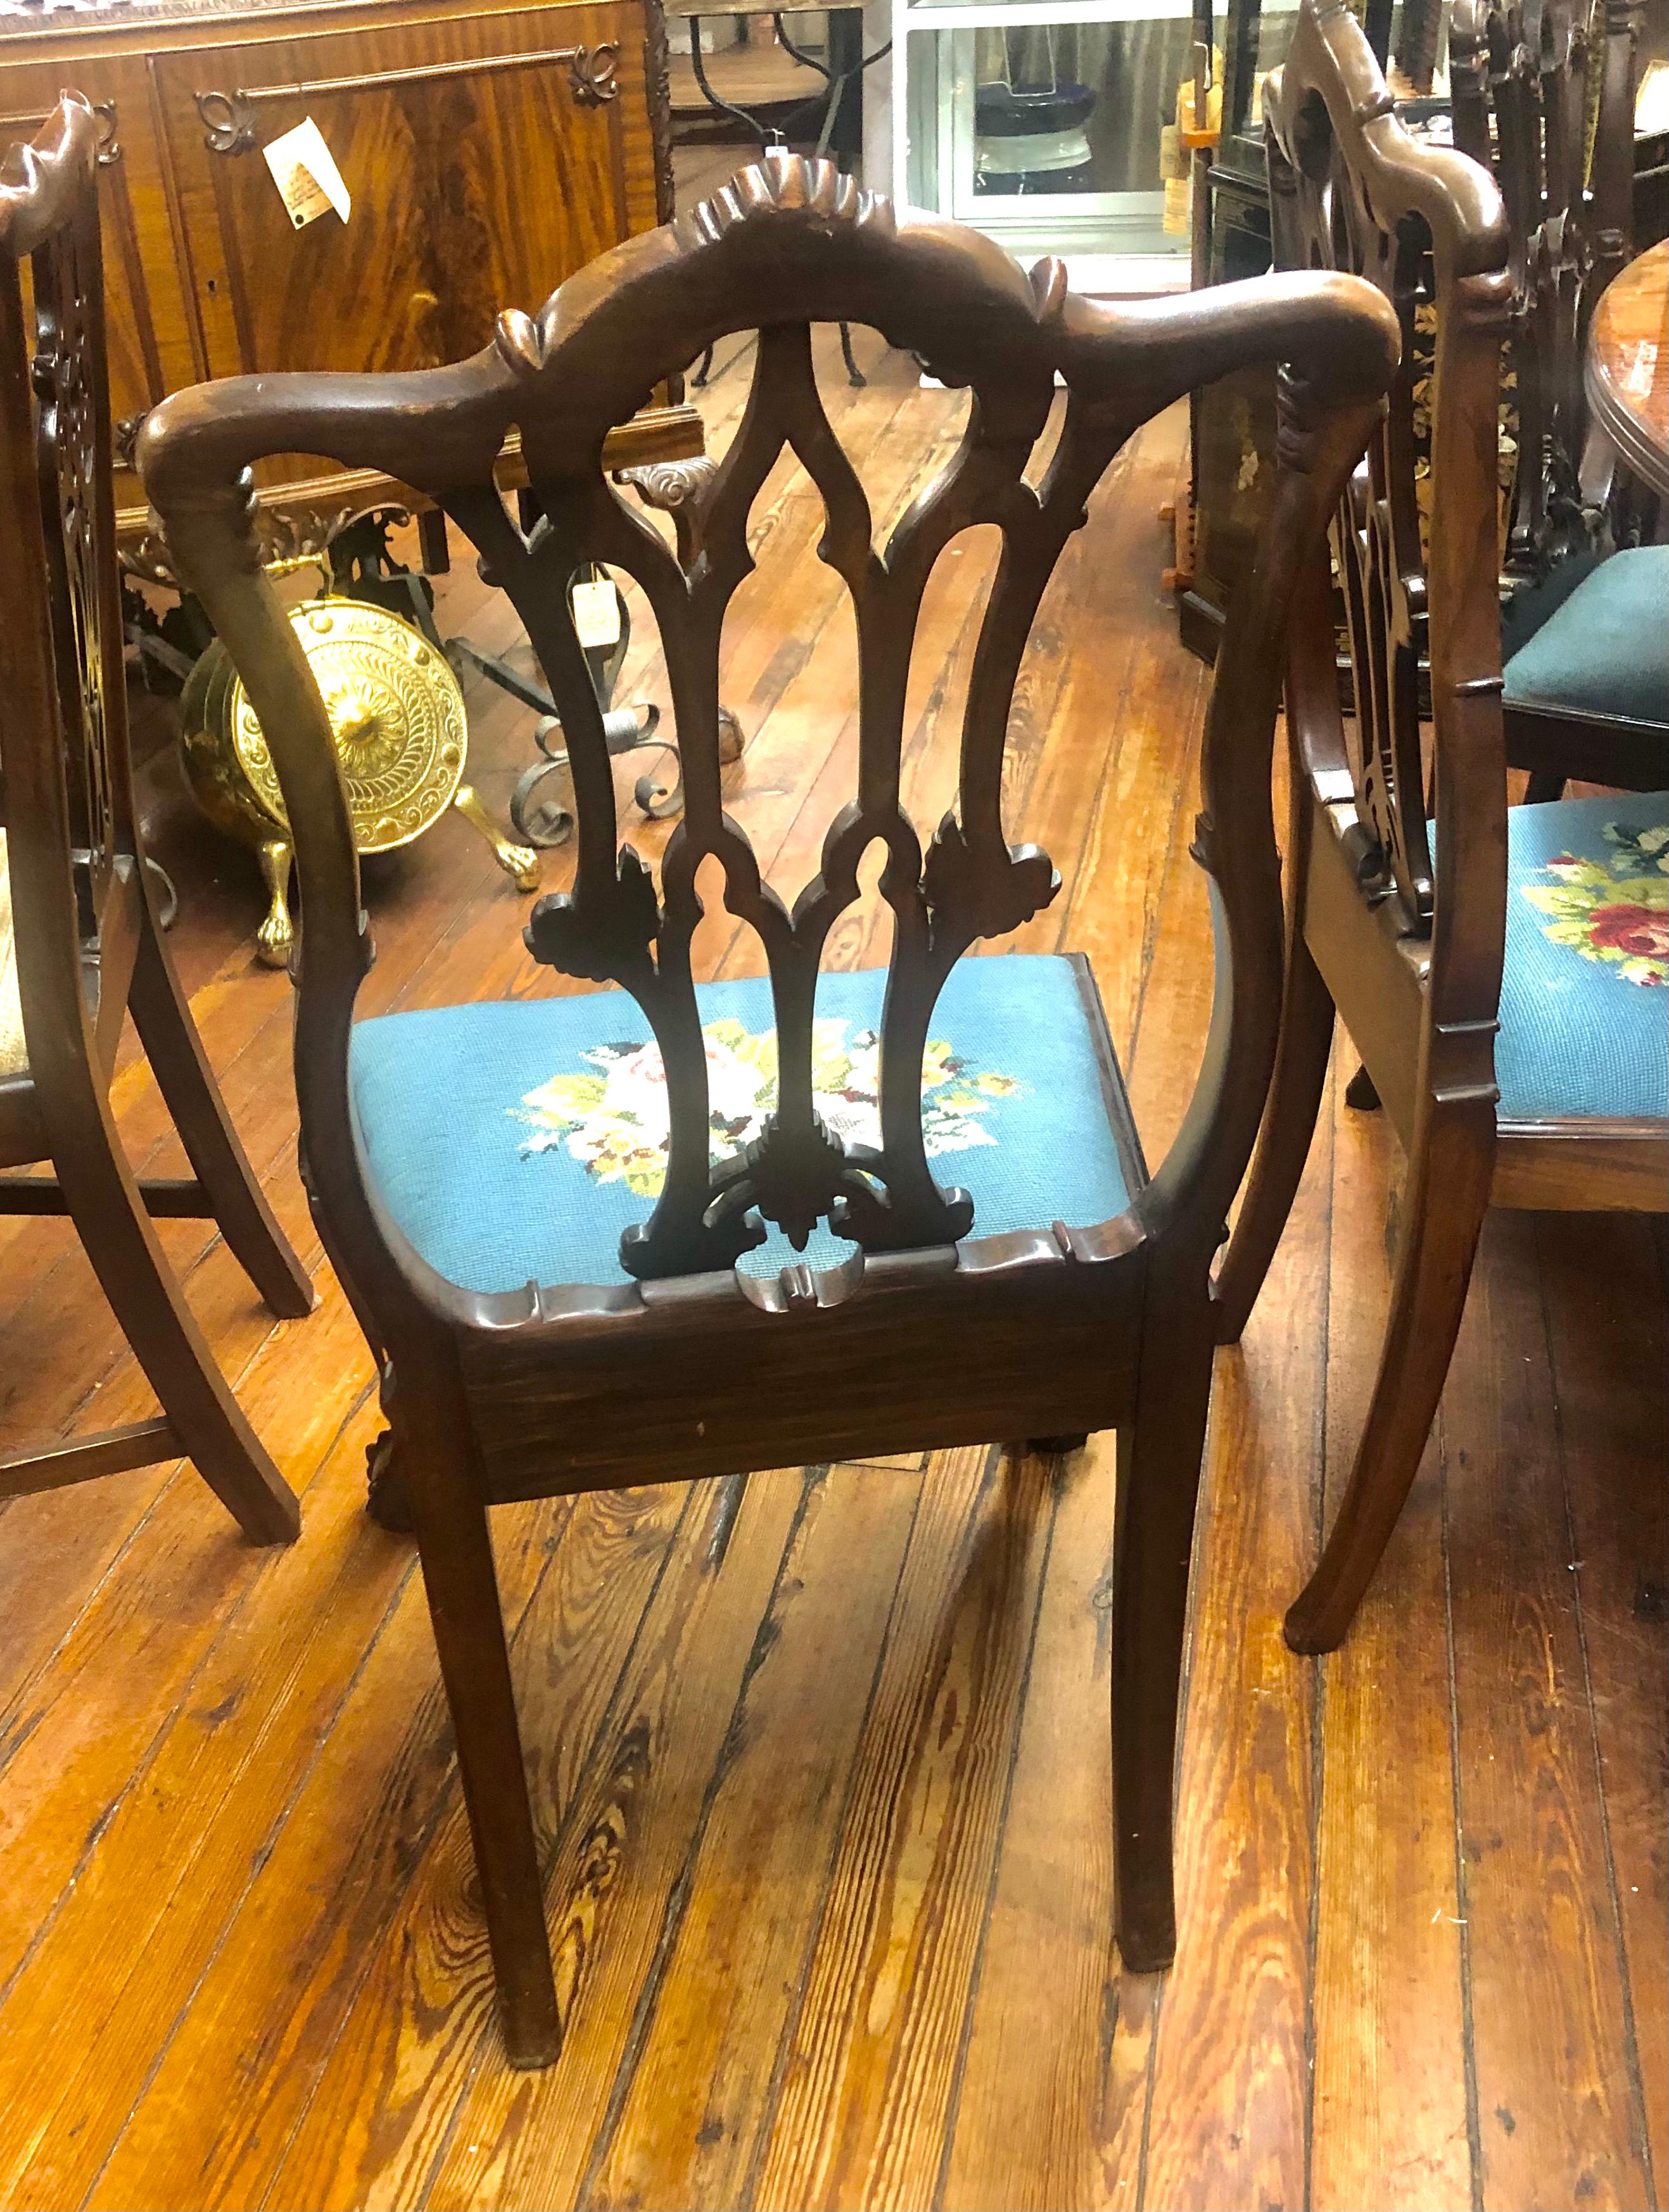 An extraordinarily fine and rare set of ten (all side chairs) antique Irish Chippendale style hand carved and pierced solid mahogany dining chairs with antique needlepoint upholstered seats. These chairs are profusely and finely hand carved and